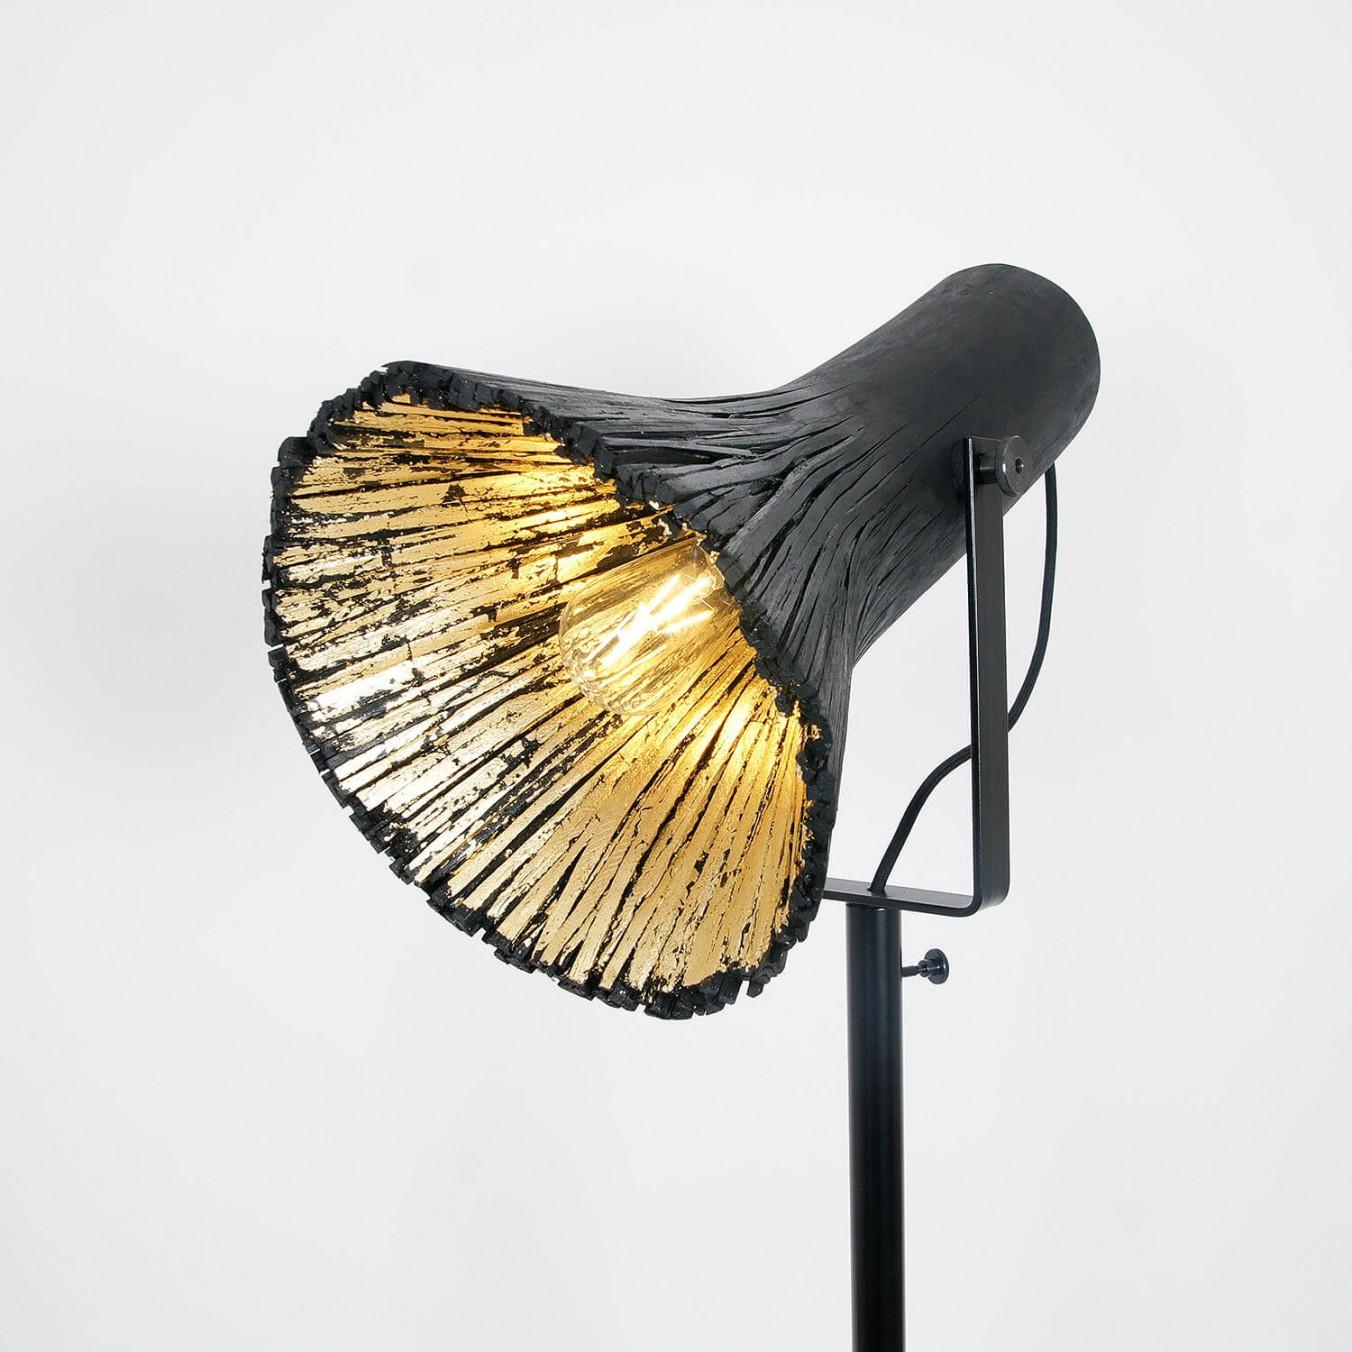 Contemporary black floor lamp - pressed wood light by Johannes Hemann

Material: wood, steel powdercoated
Light source: bulb E14, max 50 Watt
Dimensions: ø35 x H130 cm

The series „pressed wood black“ is based on the traditional technique of